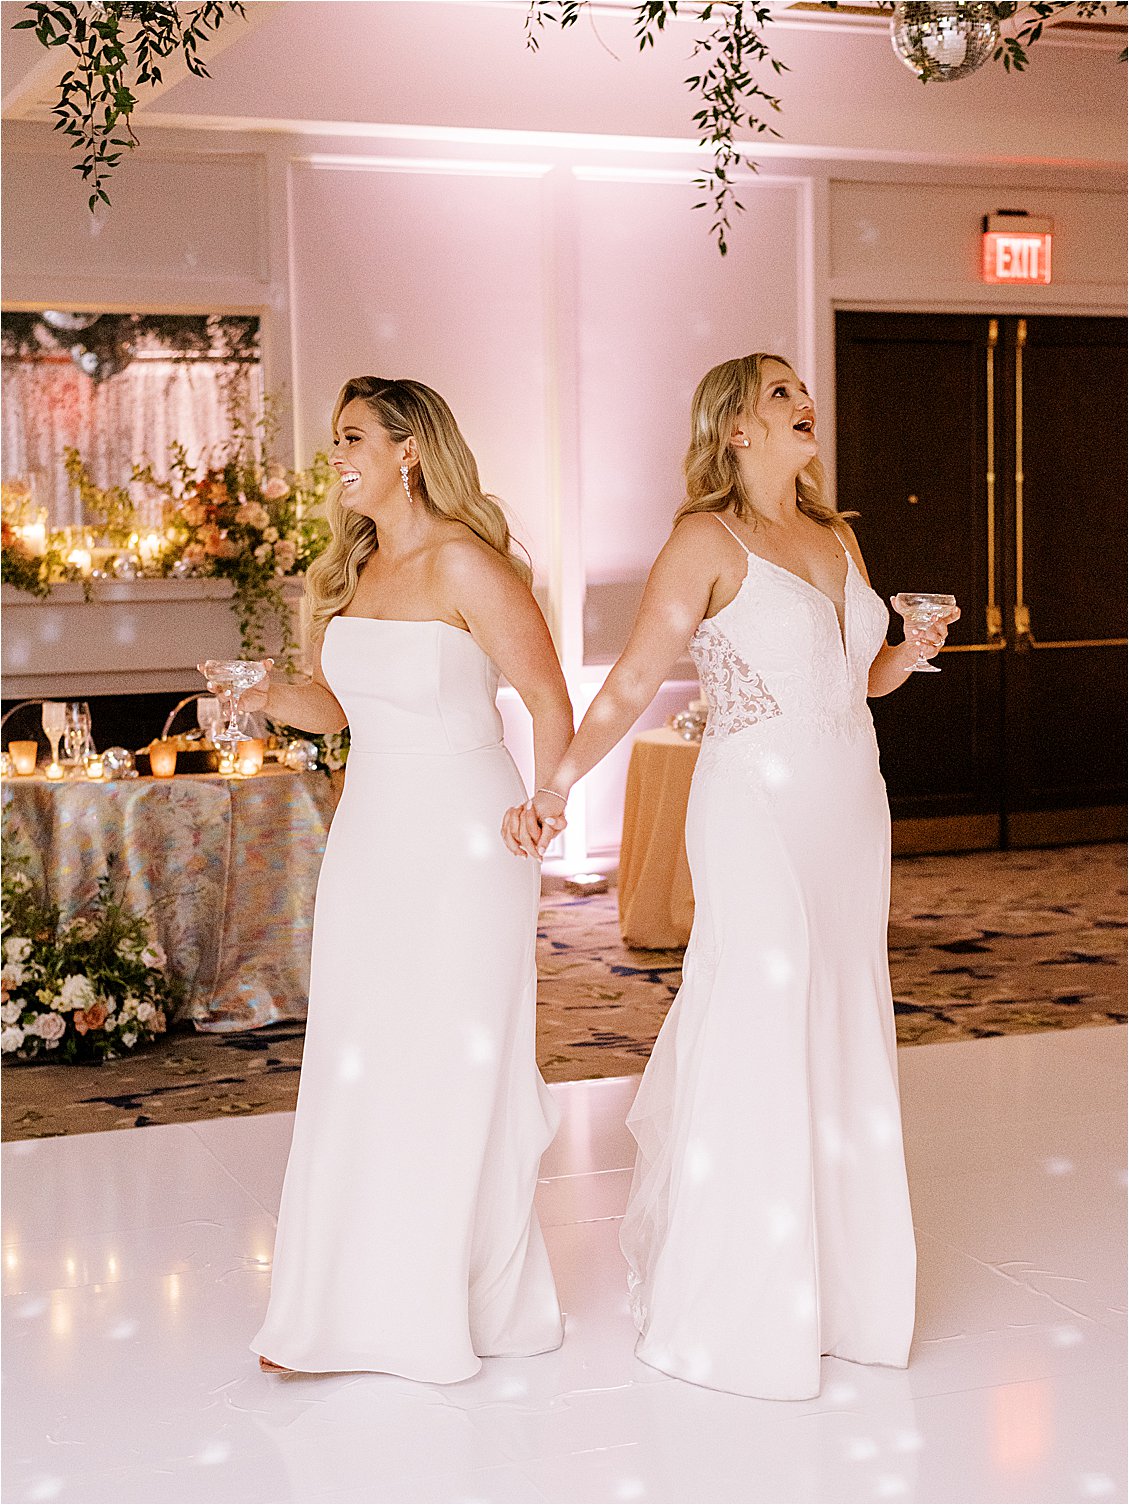 Brides reactions to their reception space